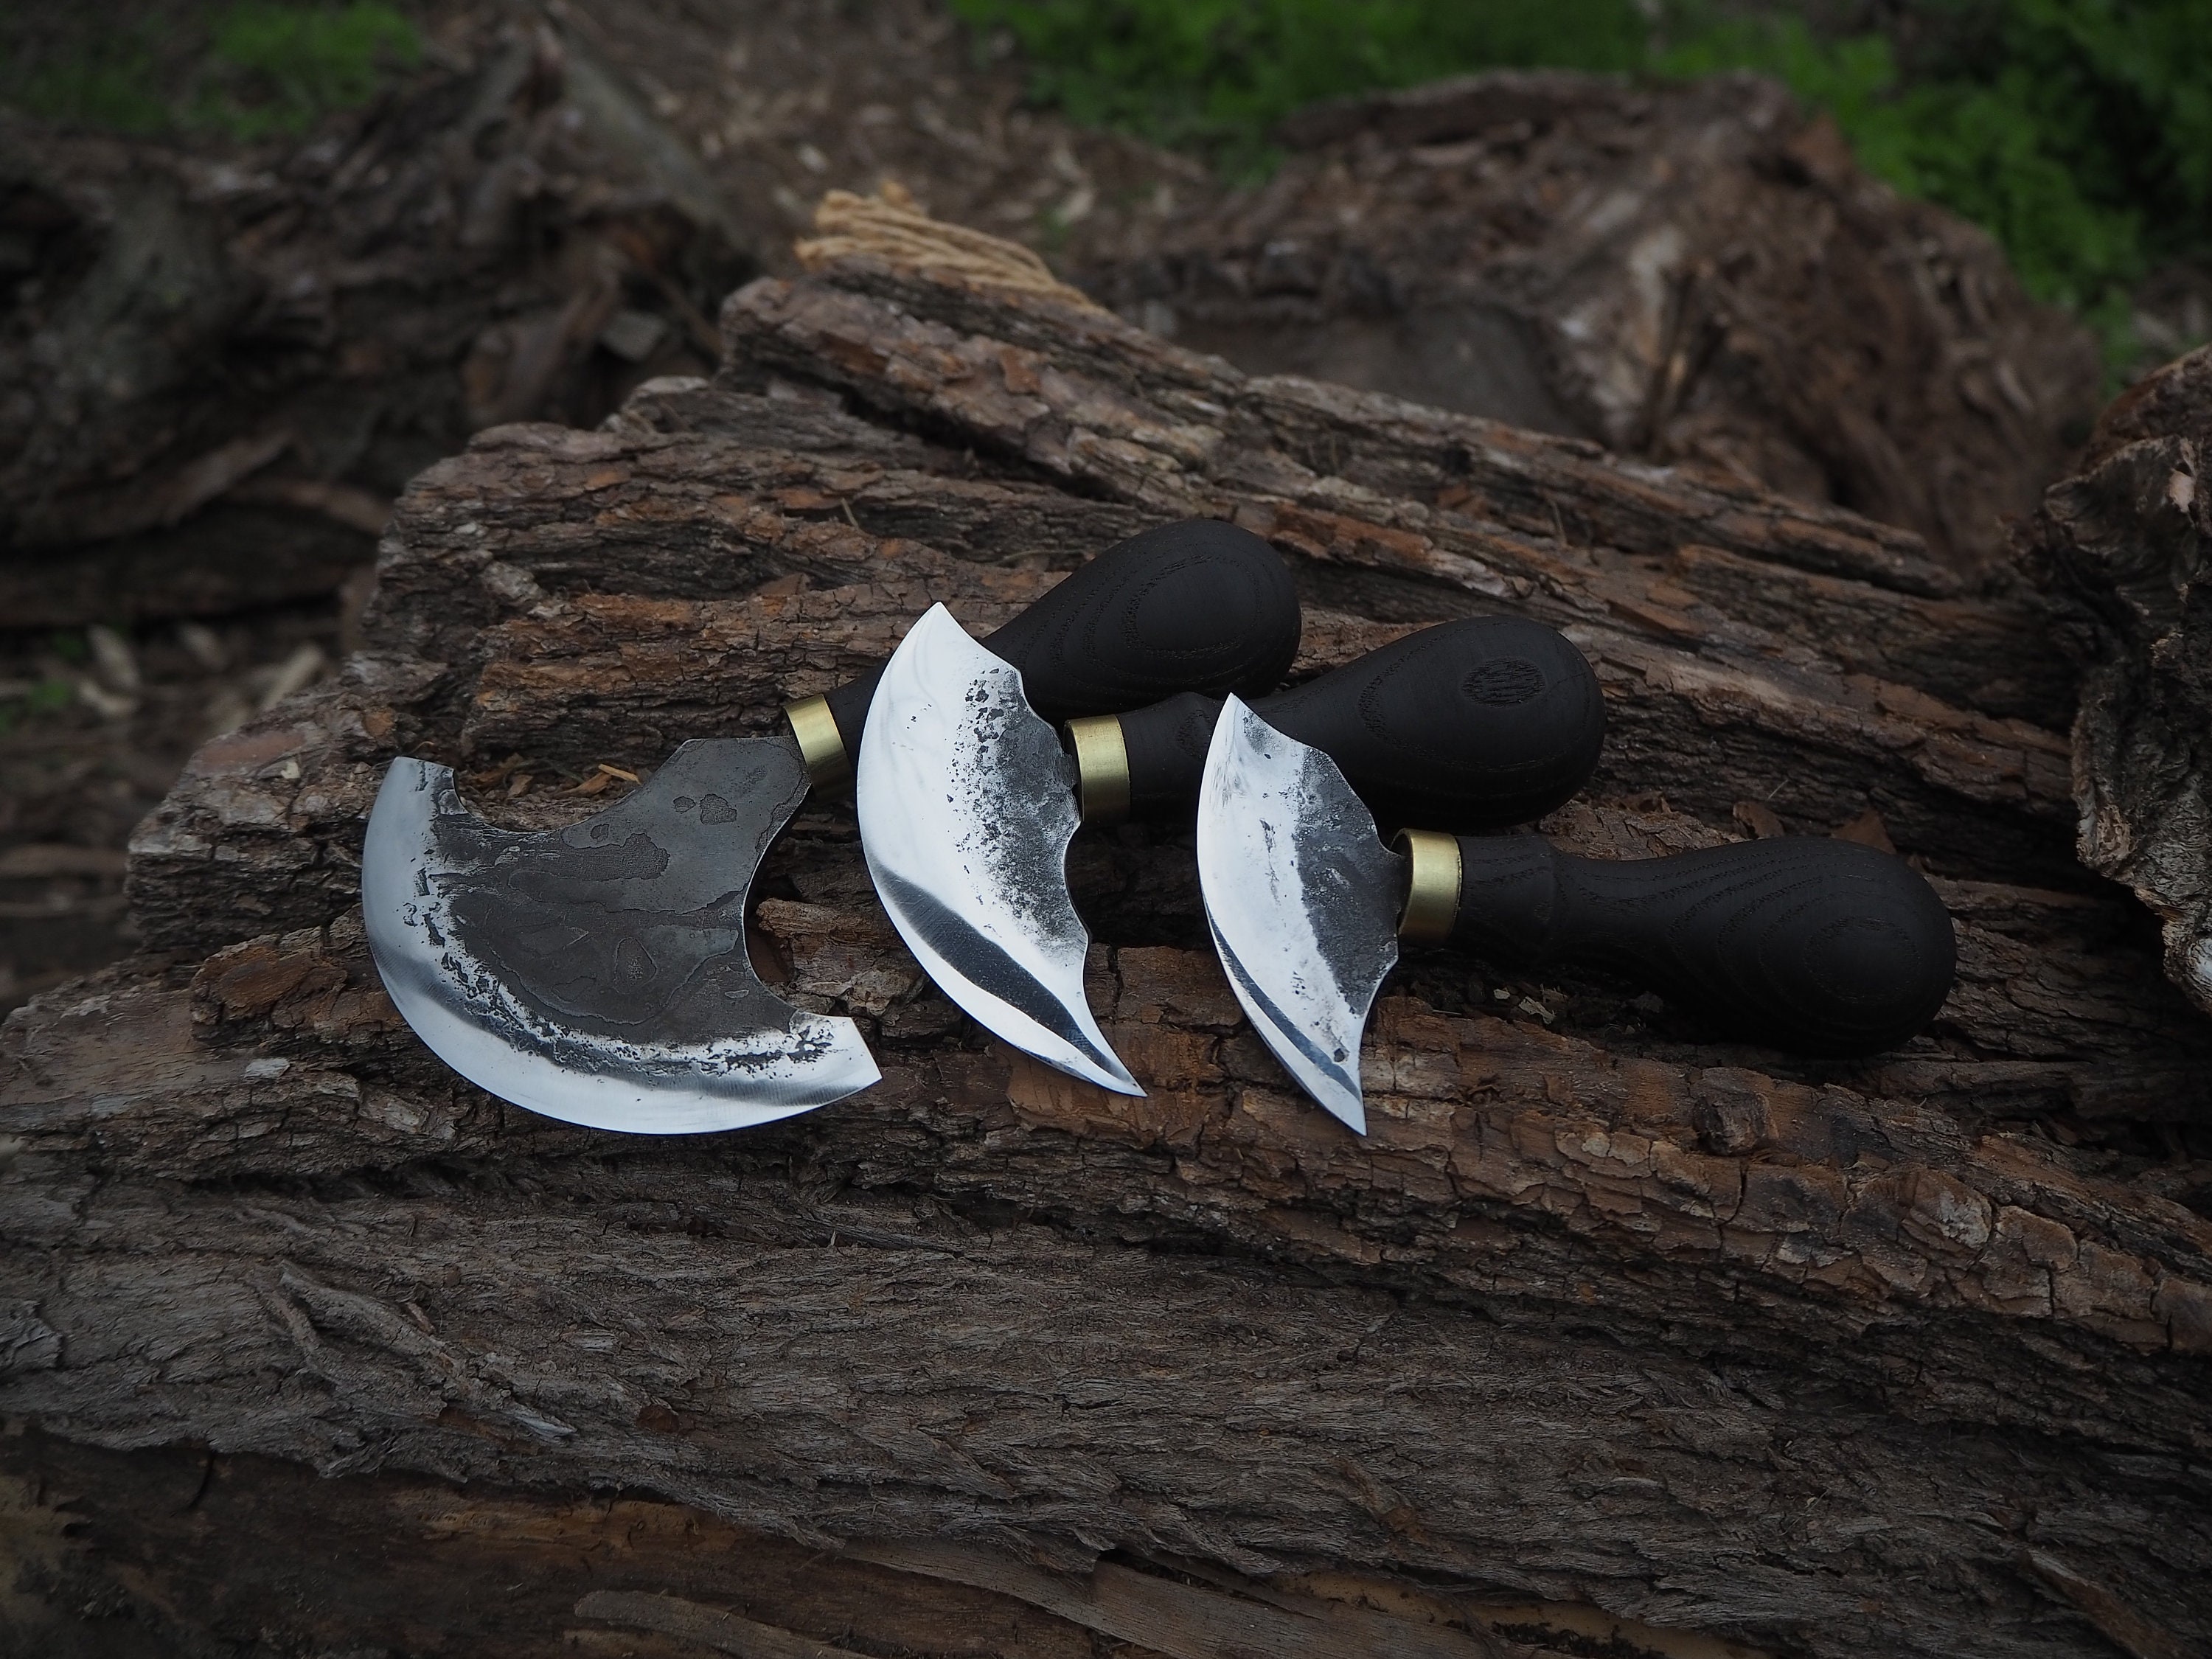 Leather Knife Set 2pcs. Hand Made Forged Knife for Leather. 